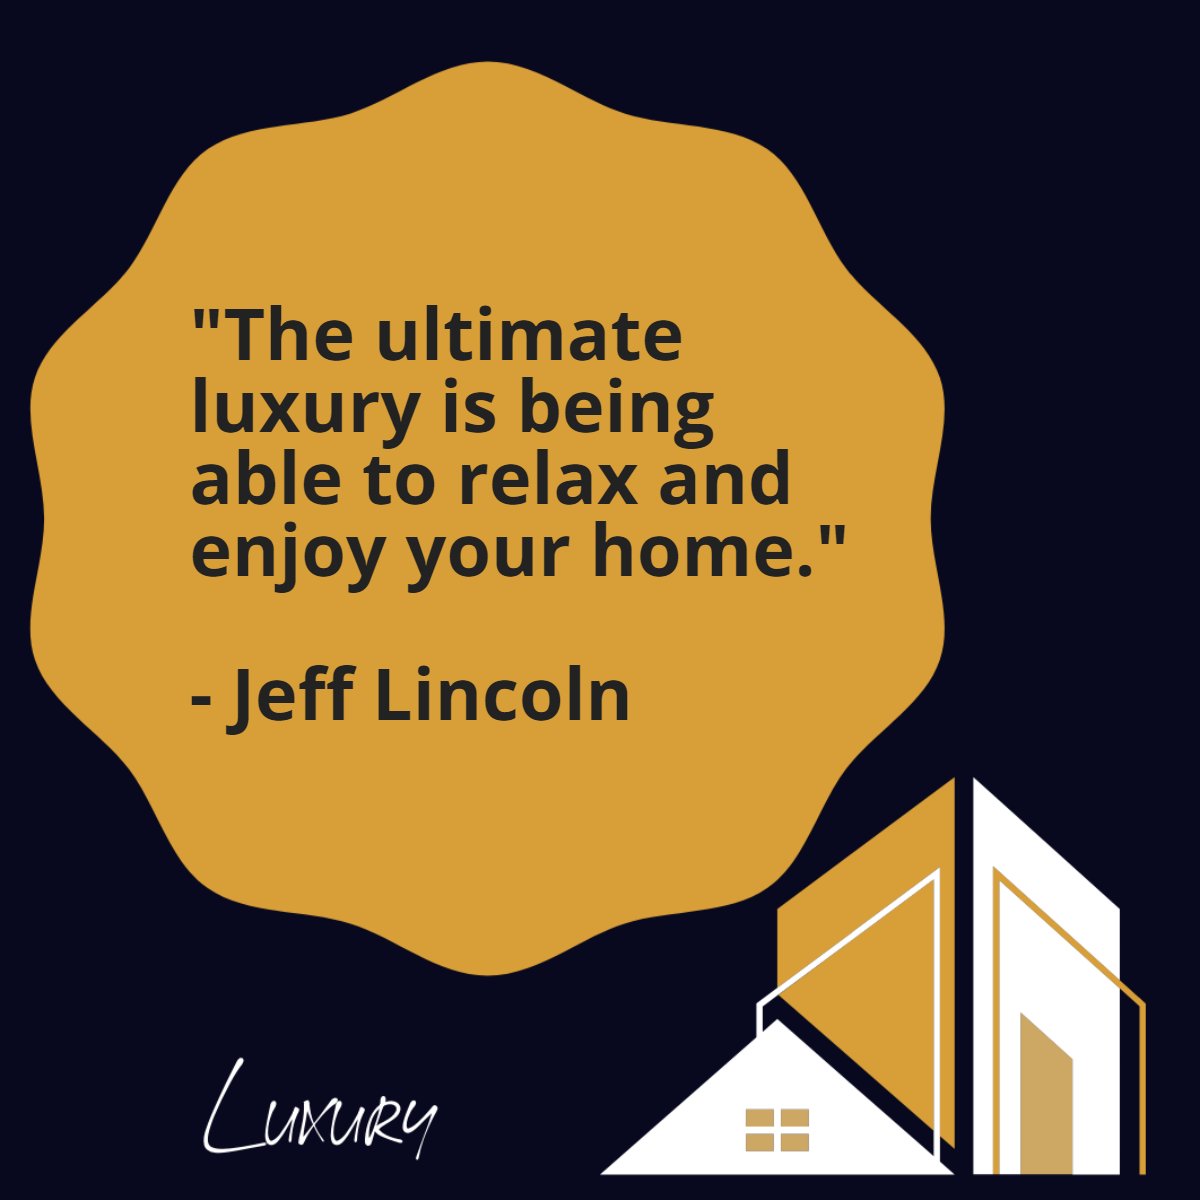 'The ultimate luxury is being able to relax and enjoy your home'
― Jeff Lincoln 📖

#luxurylifestyle #luxury #lovemyhome #home #lifestyle #jefflincoln #quote #quoteoftheday✏️ 
 #OhioRealEstate #AkronRealtor #CantonRealtor